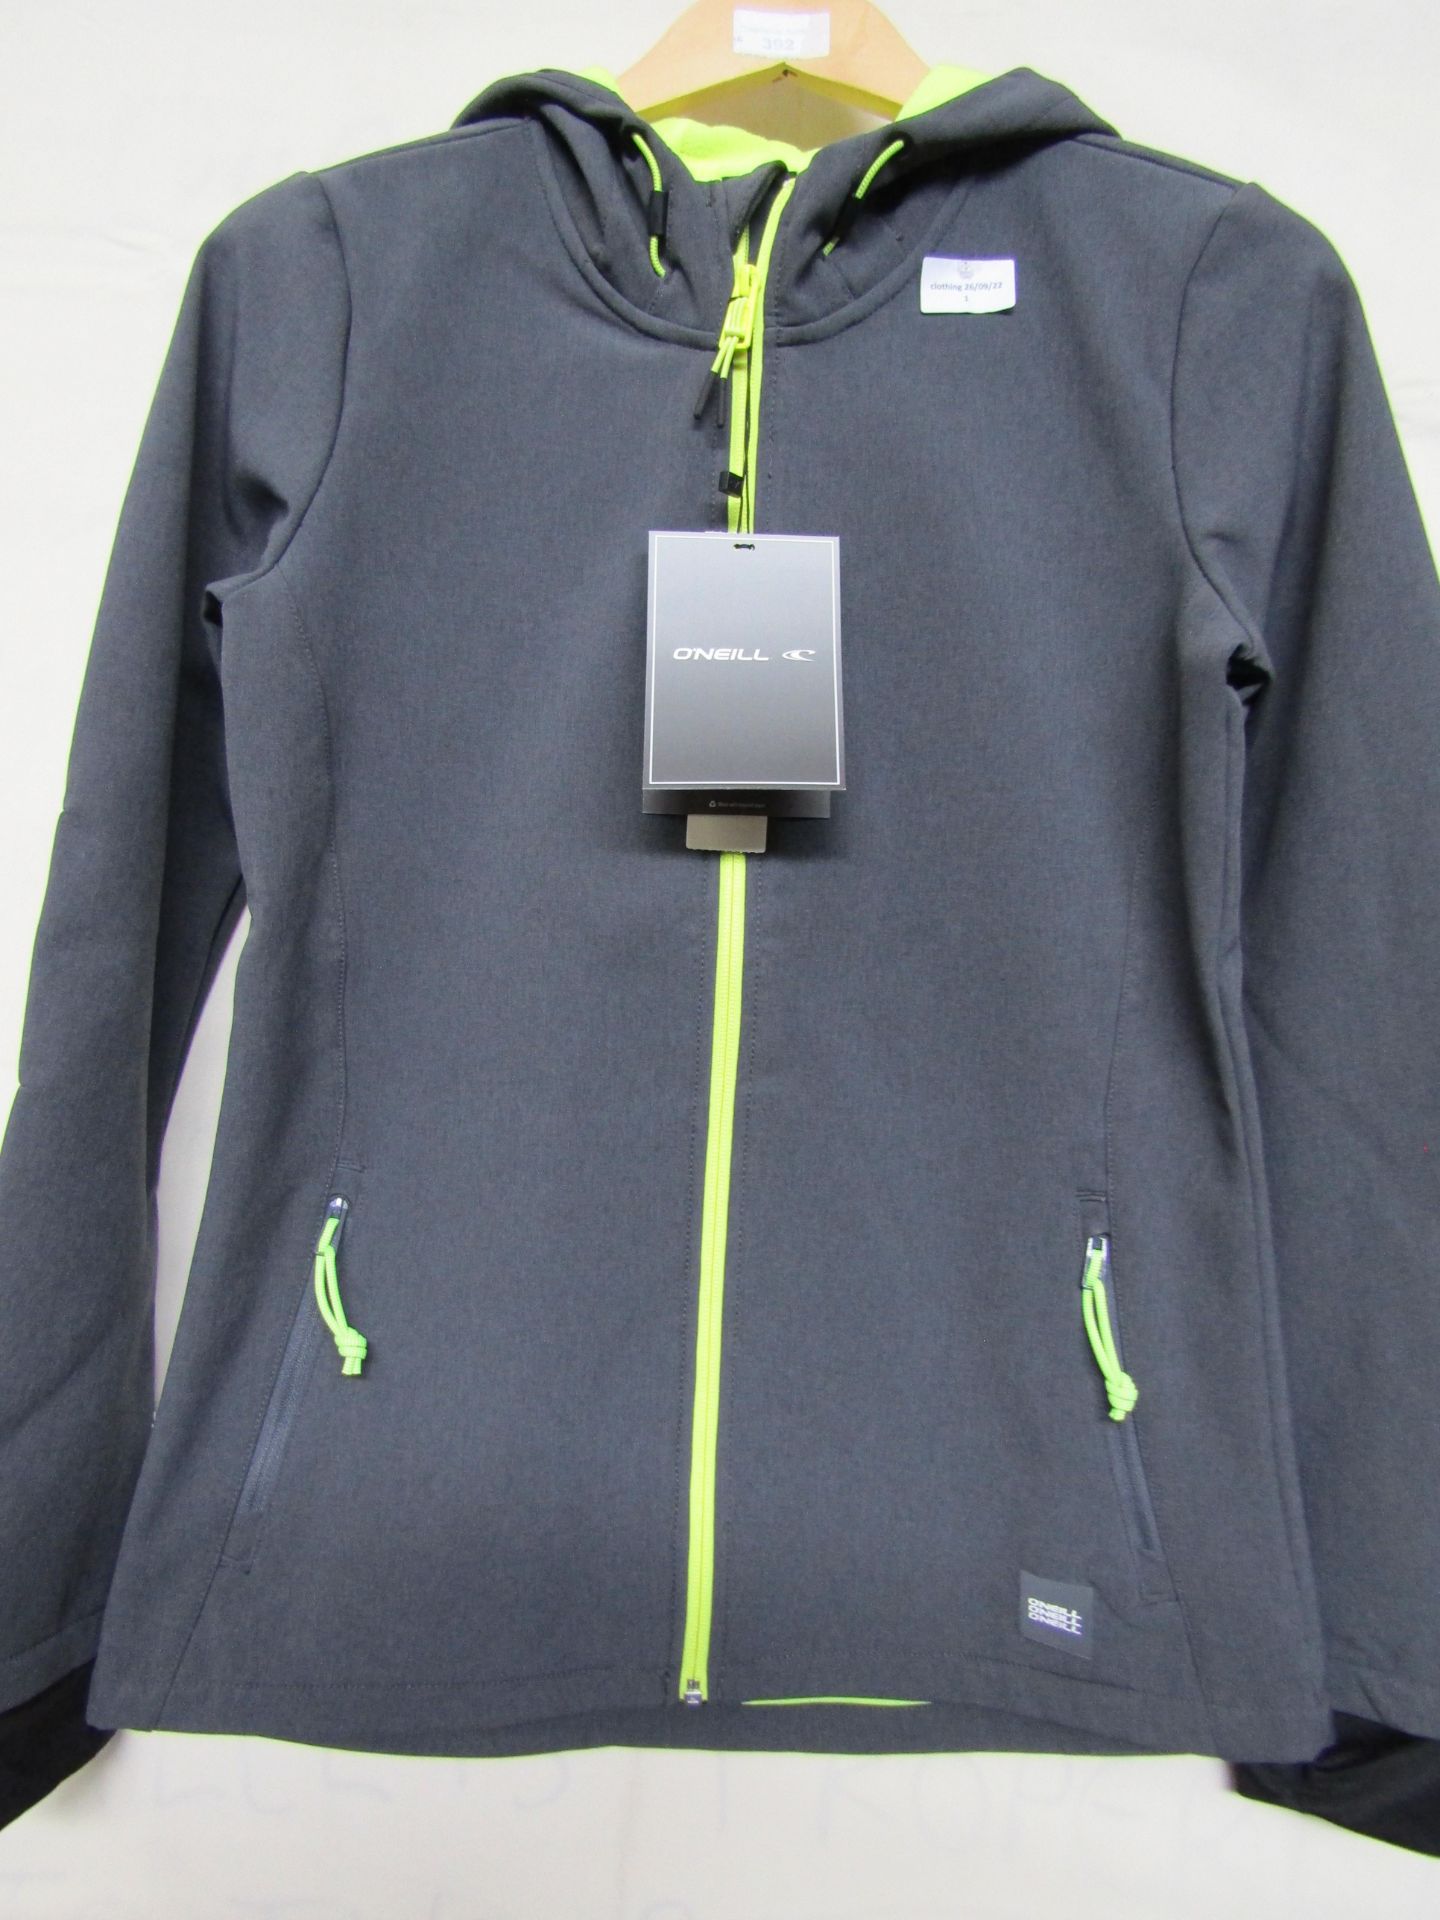 O"neill Hybrid Softshell Jacket Grey Size S New With Tags RRP £99